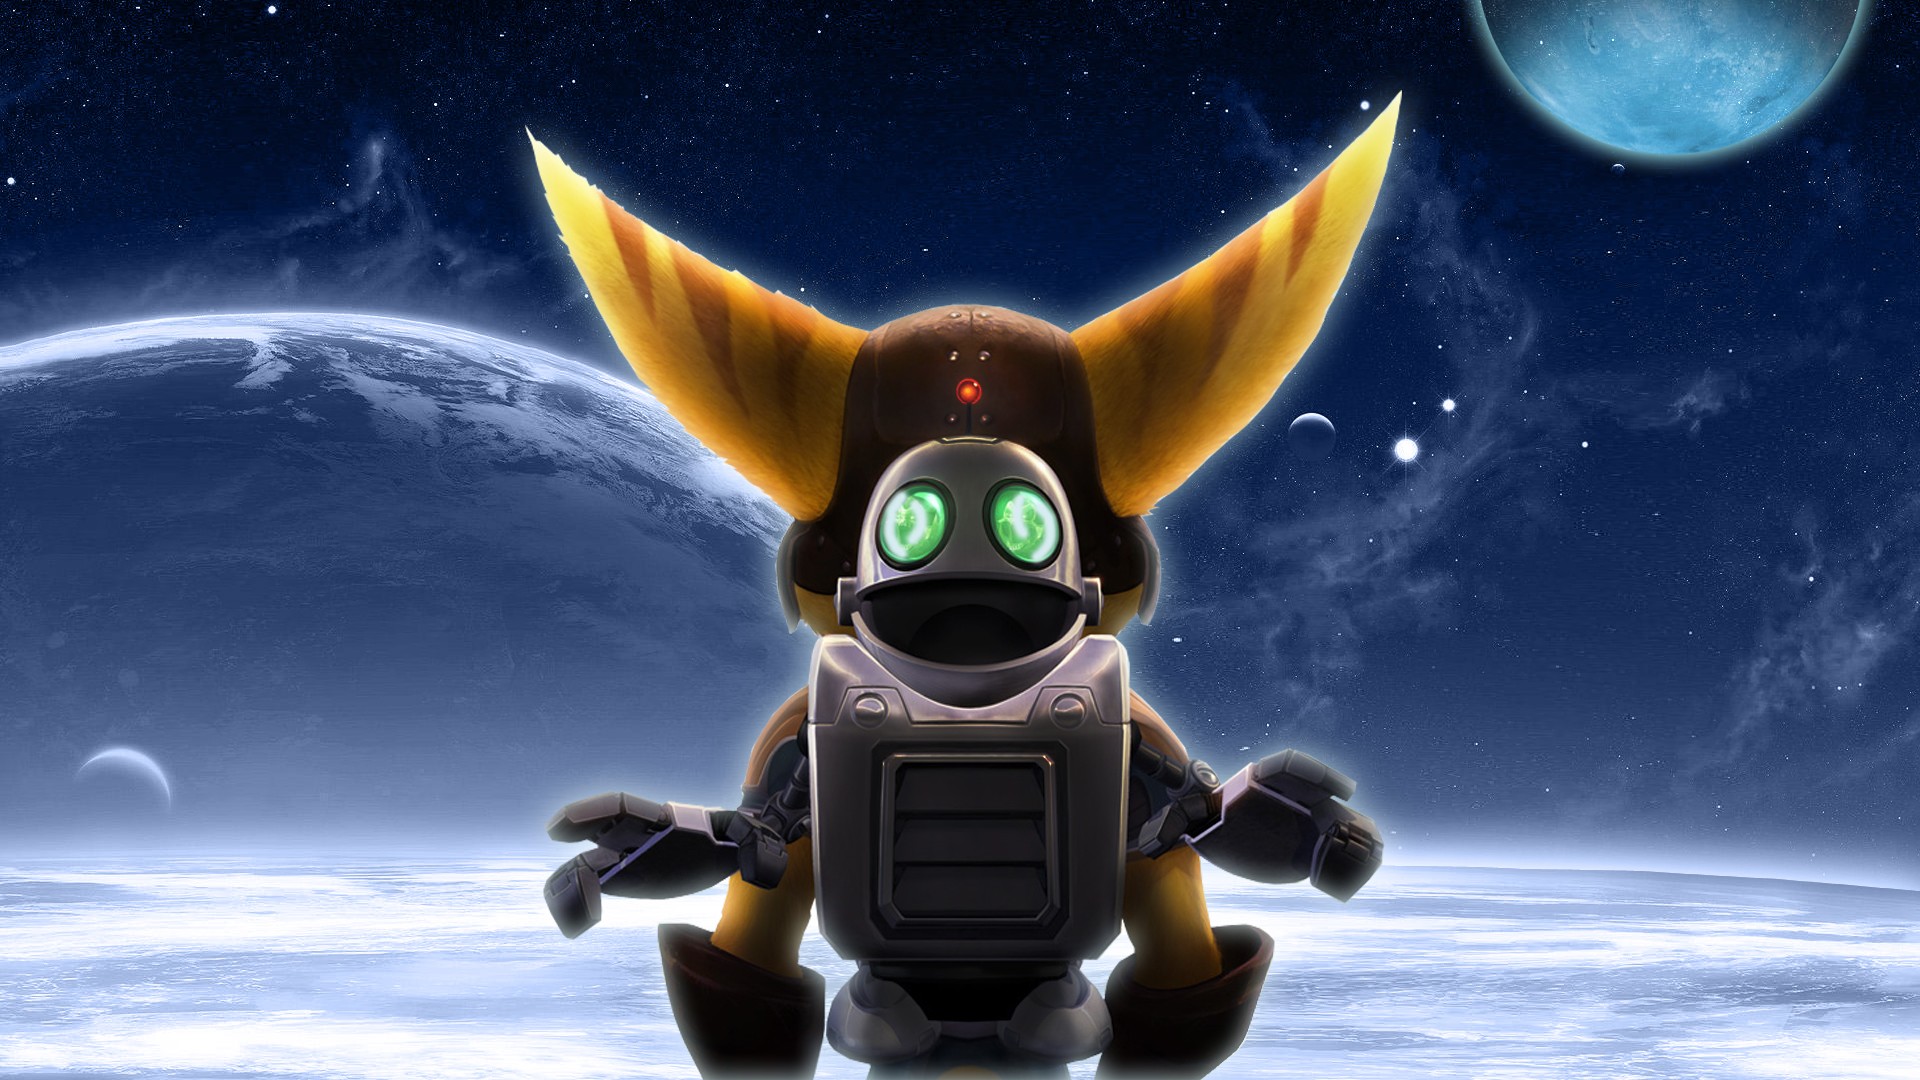 ratchet & clank, video game Full HD